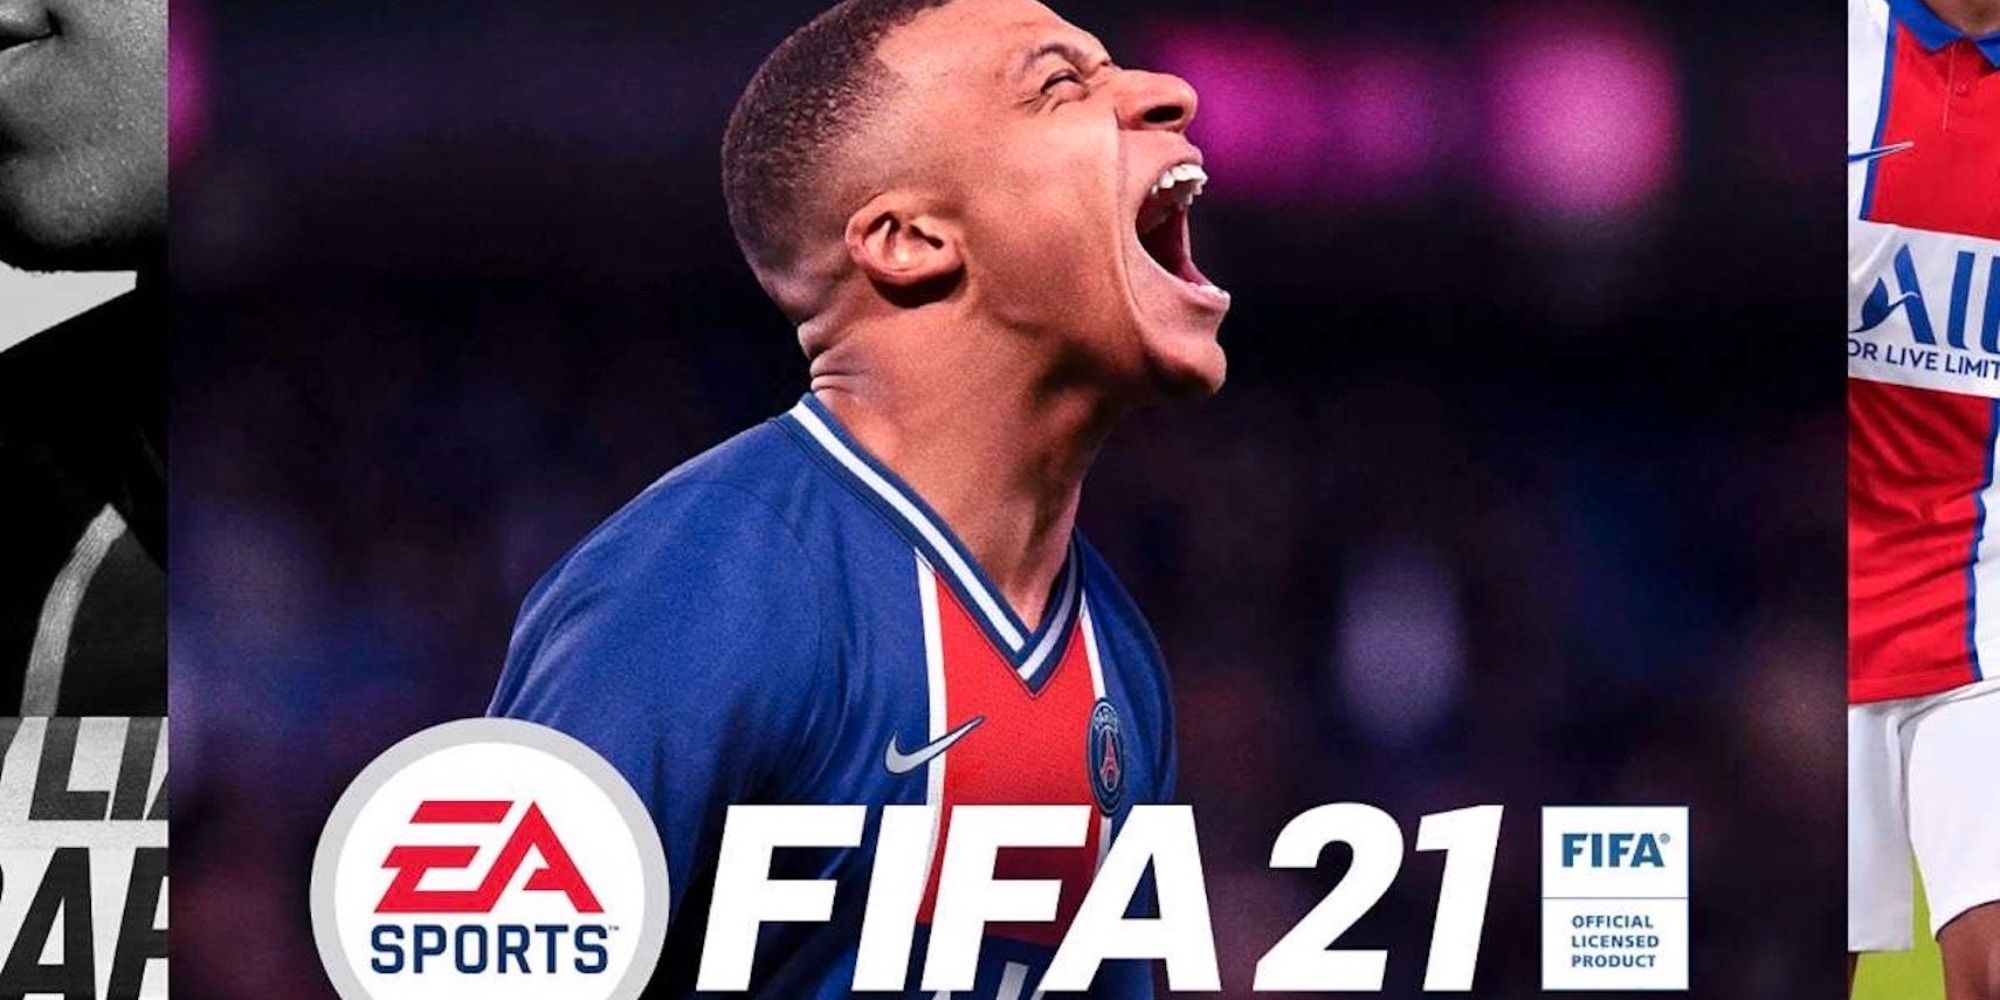 promotional image for FIFA 21 featuring Kylian Mbappé screaming on the front with the game's logo and EA Sports logo beneath him